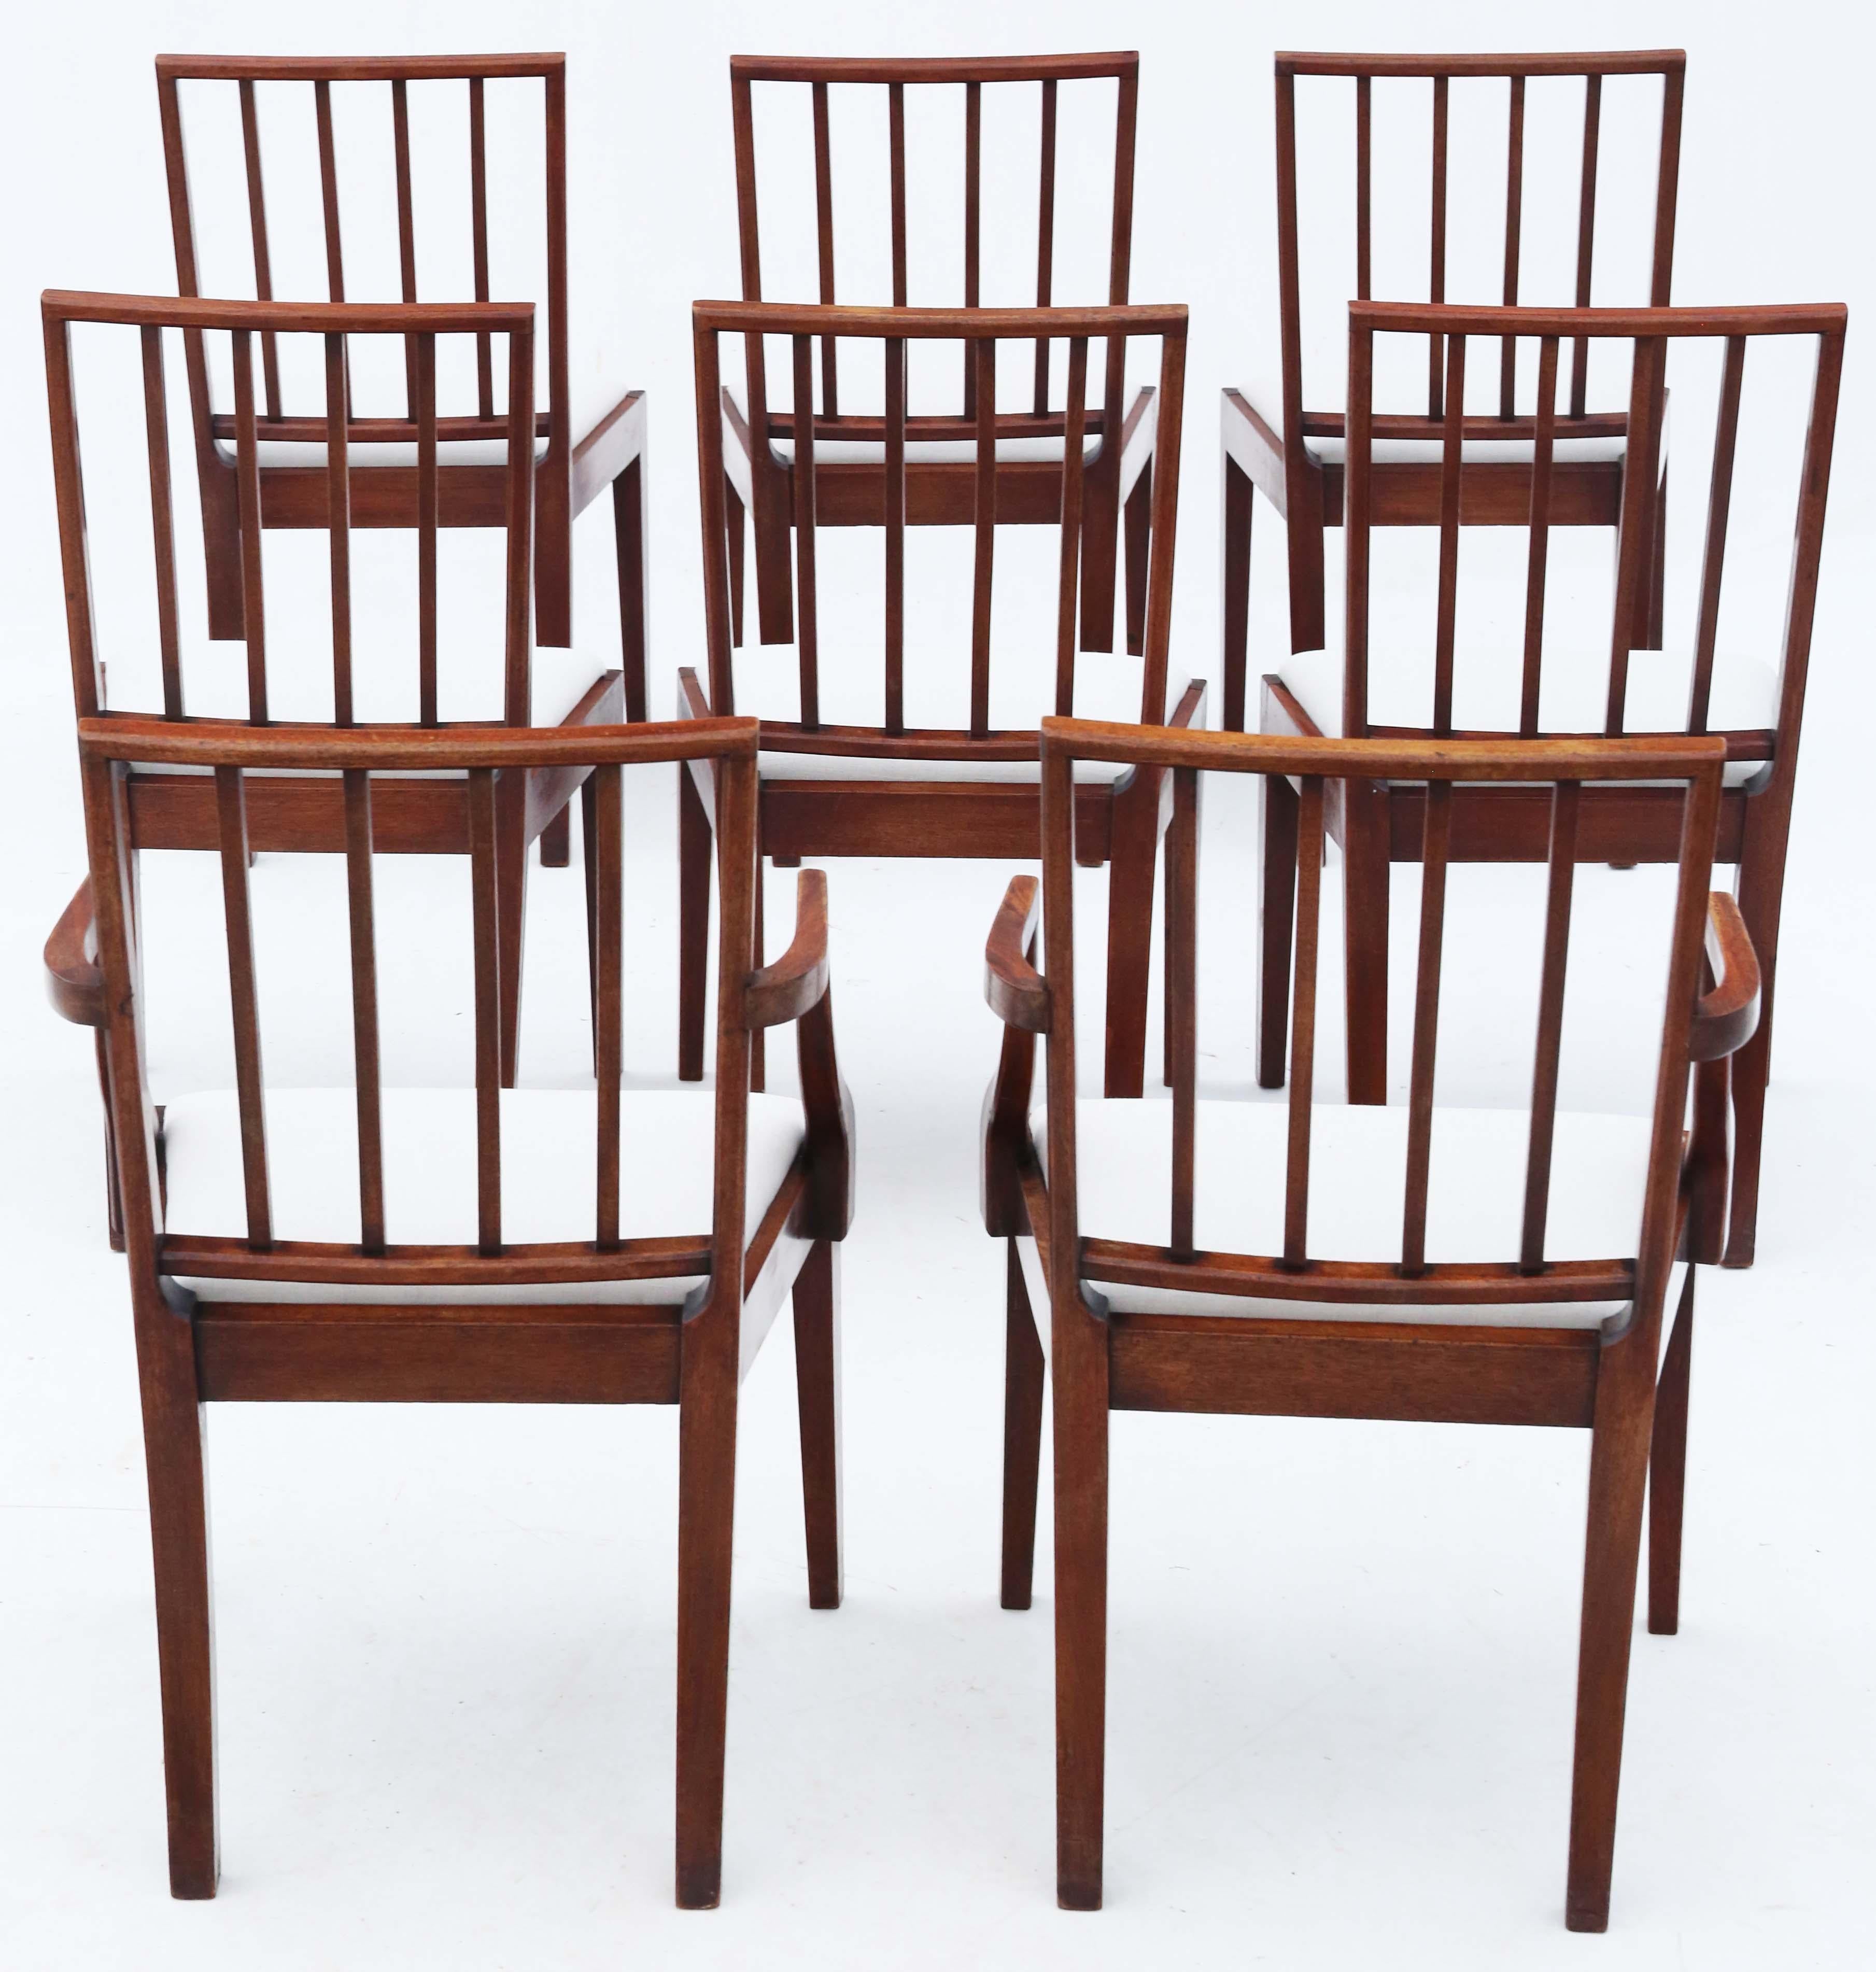 Mahogany Dining Chairs: Set of 8 (6+2), Antique Quality, C1820 In Good Condition For Sale In Wisbech, Cambridgeshire